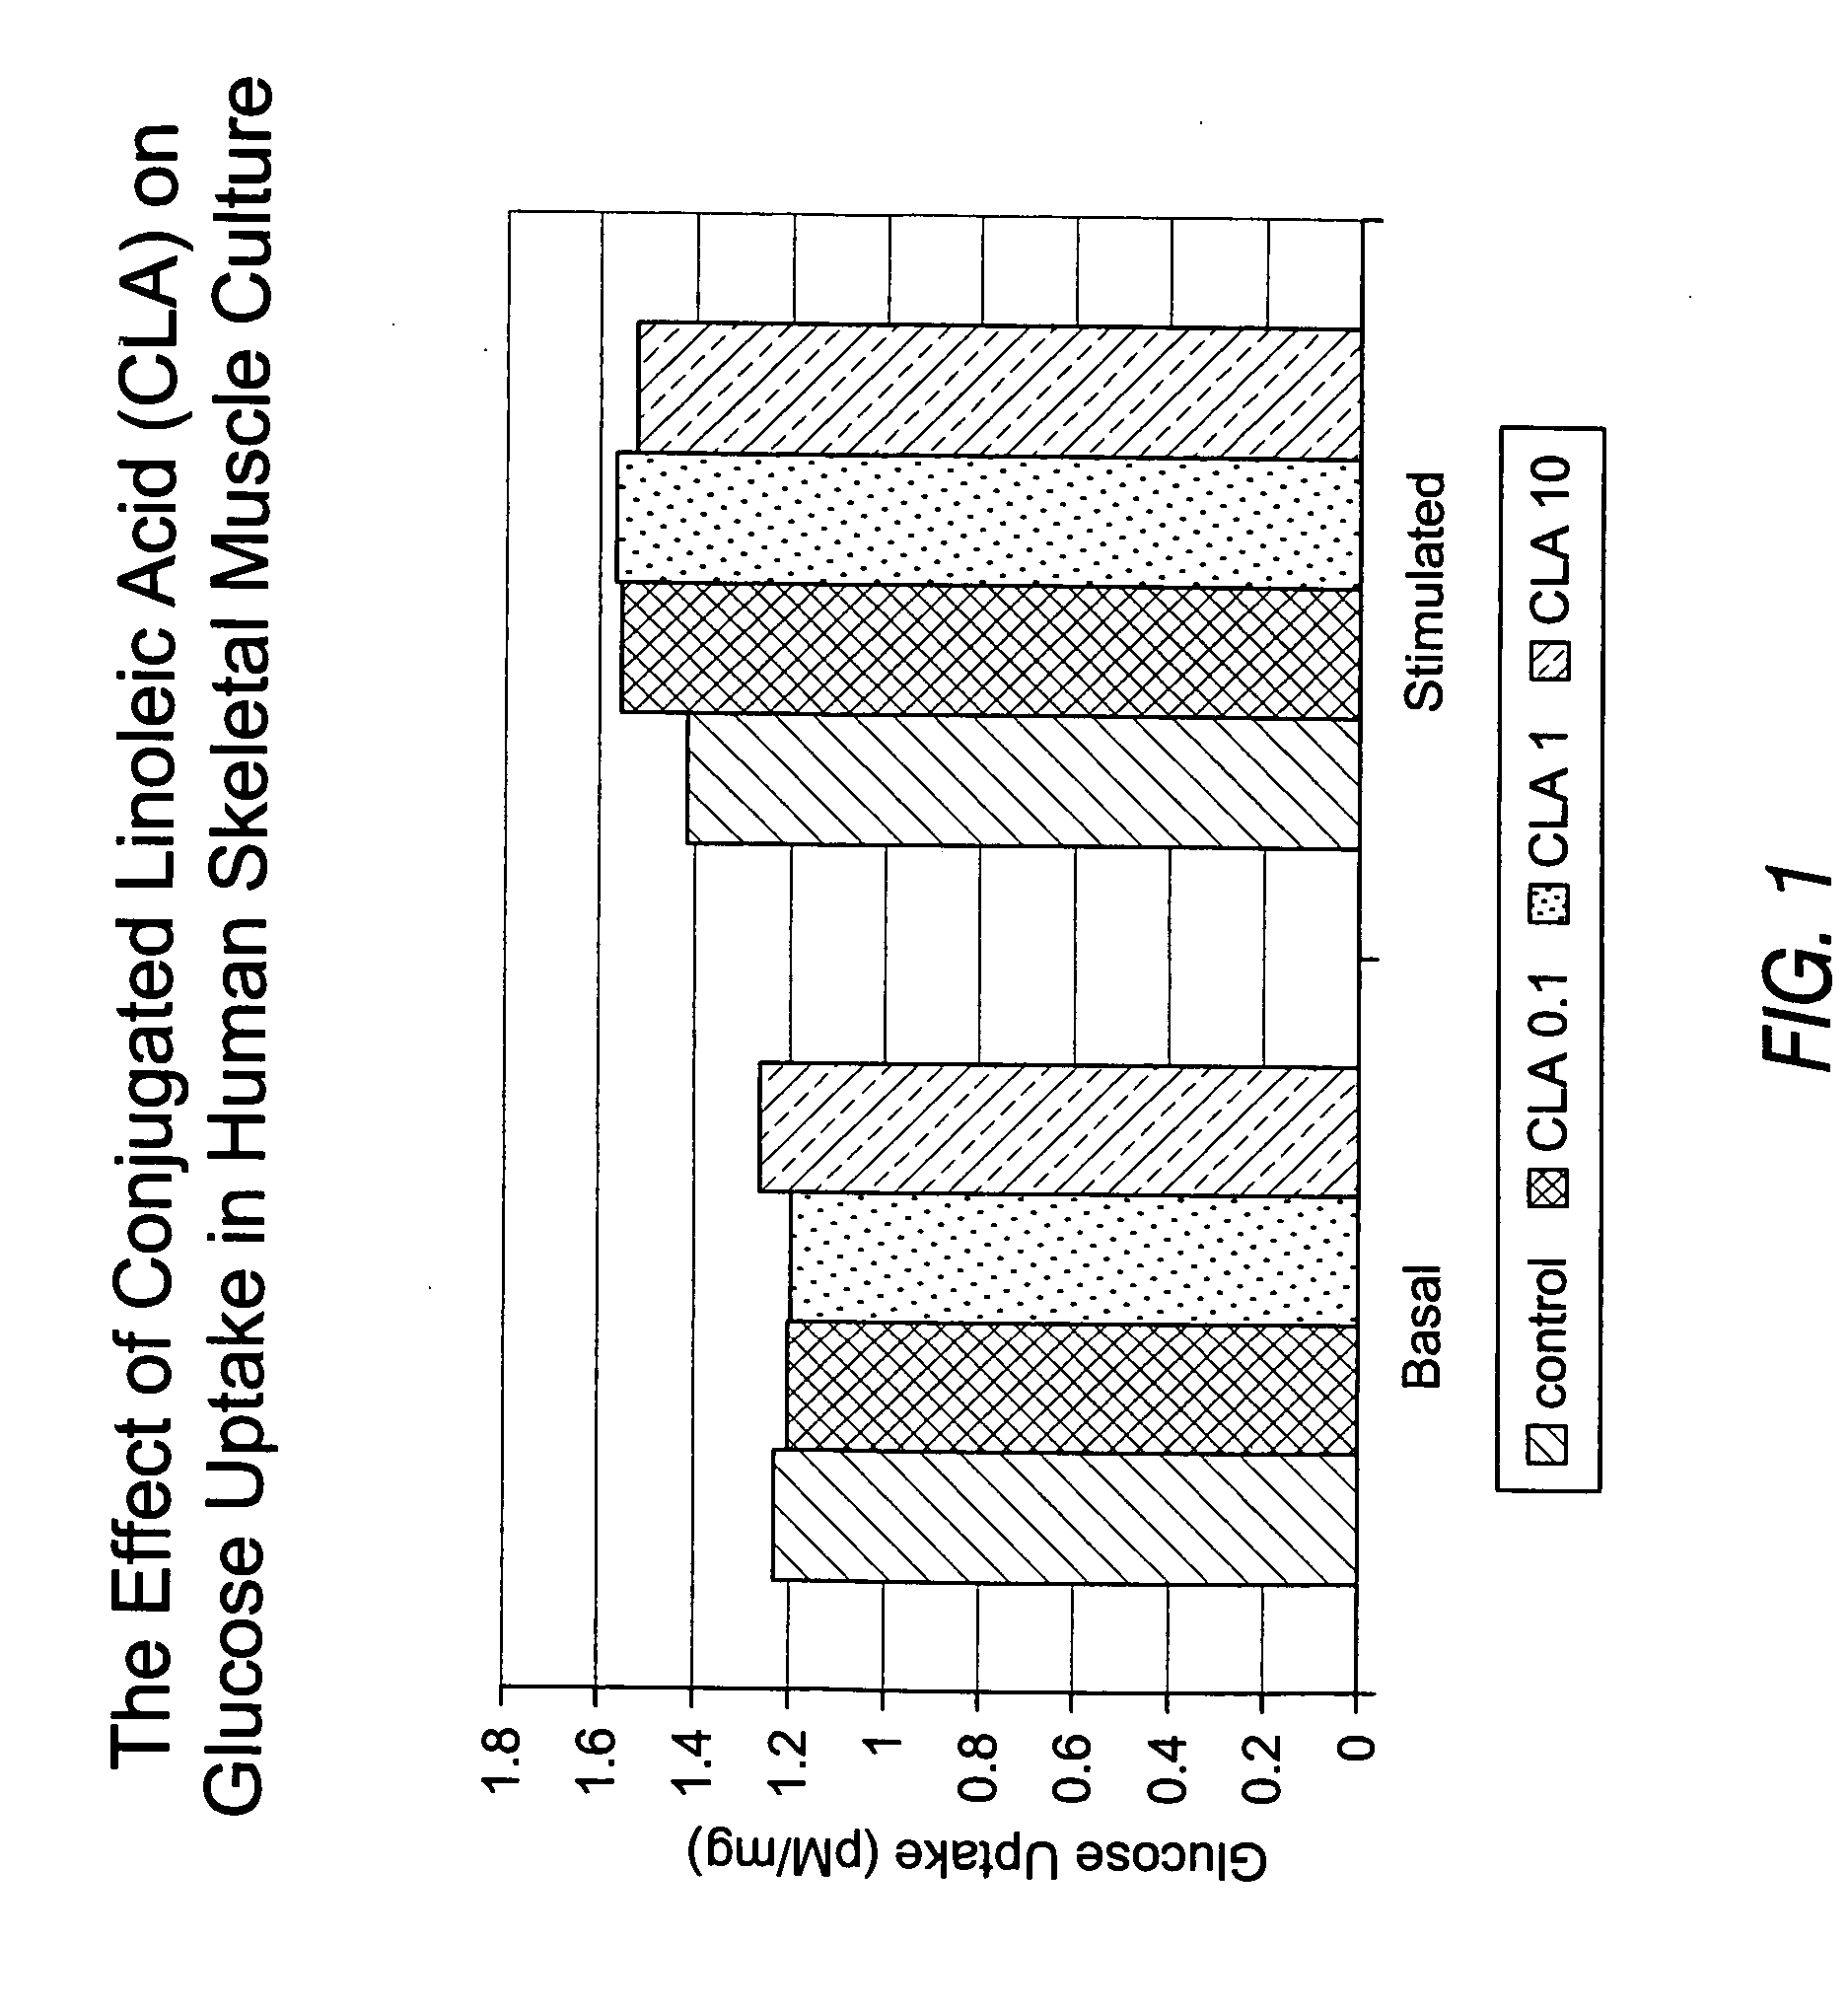 Methods for the treatment of diabetes, the reduction of body fat, improvement of insulin sensitivity, reduction of hyperglycemia, and reduction of hypercholesterolemia with chromium complexes, conjugated fatty acids, and/or conjugated fatty alcohols